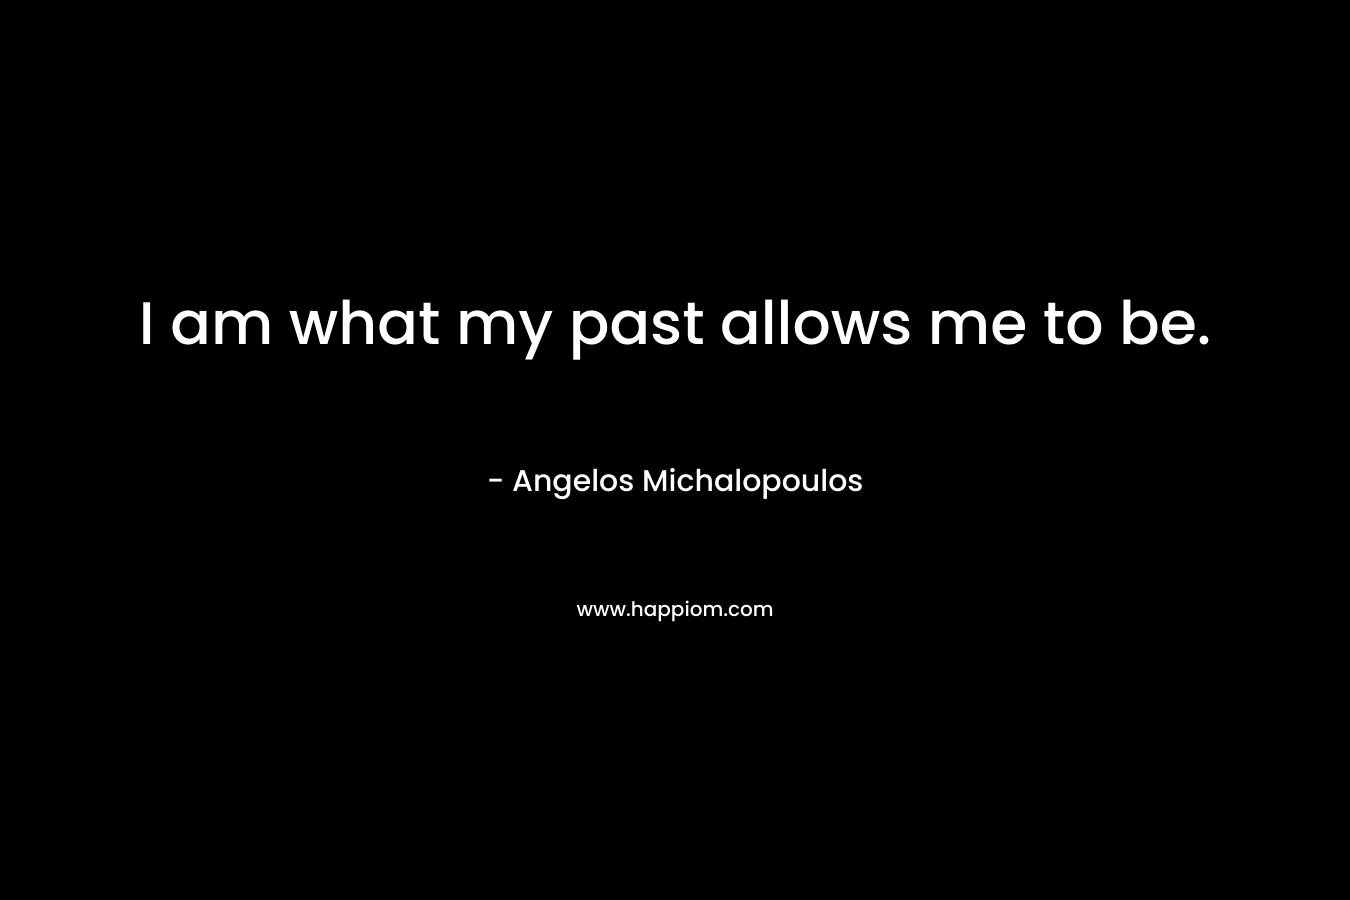 I am what my past allows me to be.